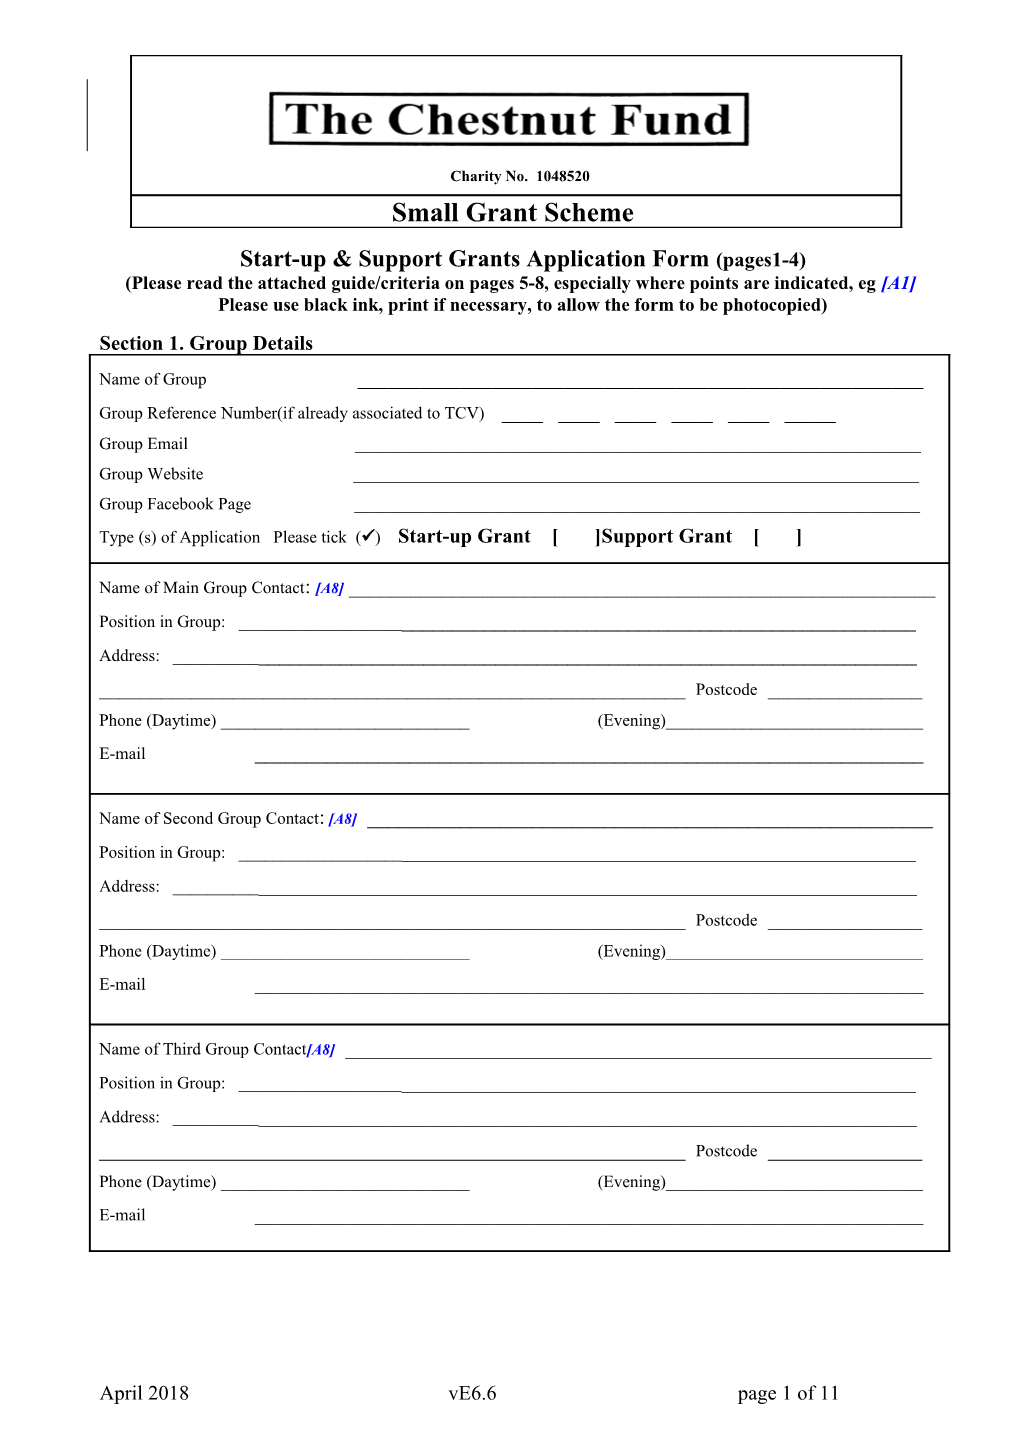 Start-Up & Support Grants Application Form(Pages1-4)